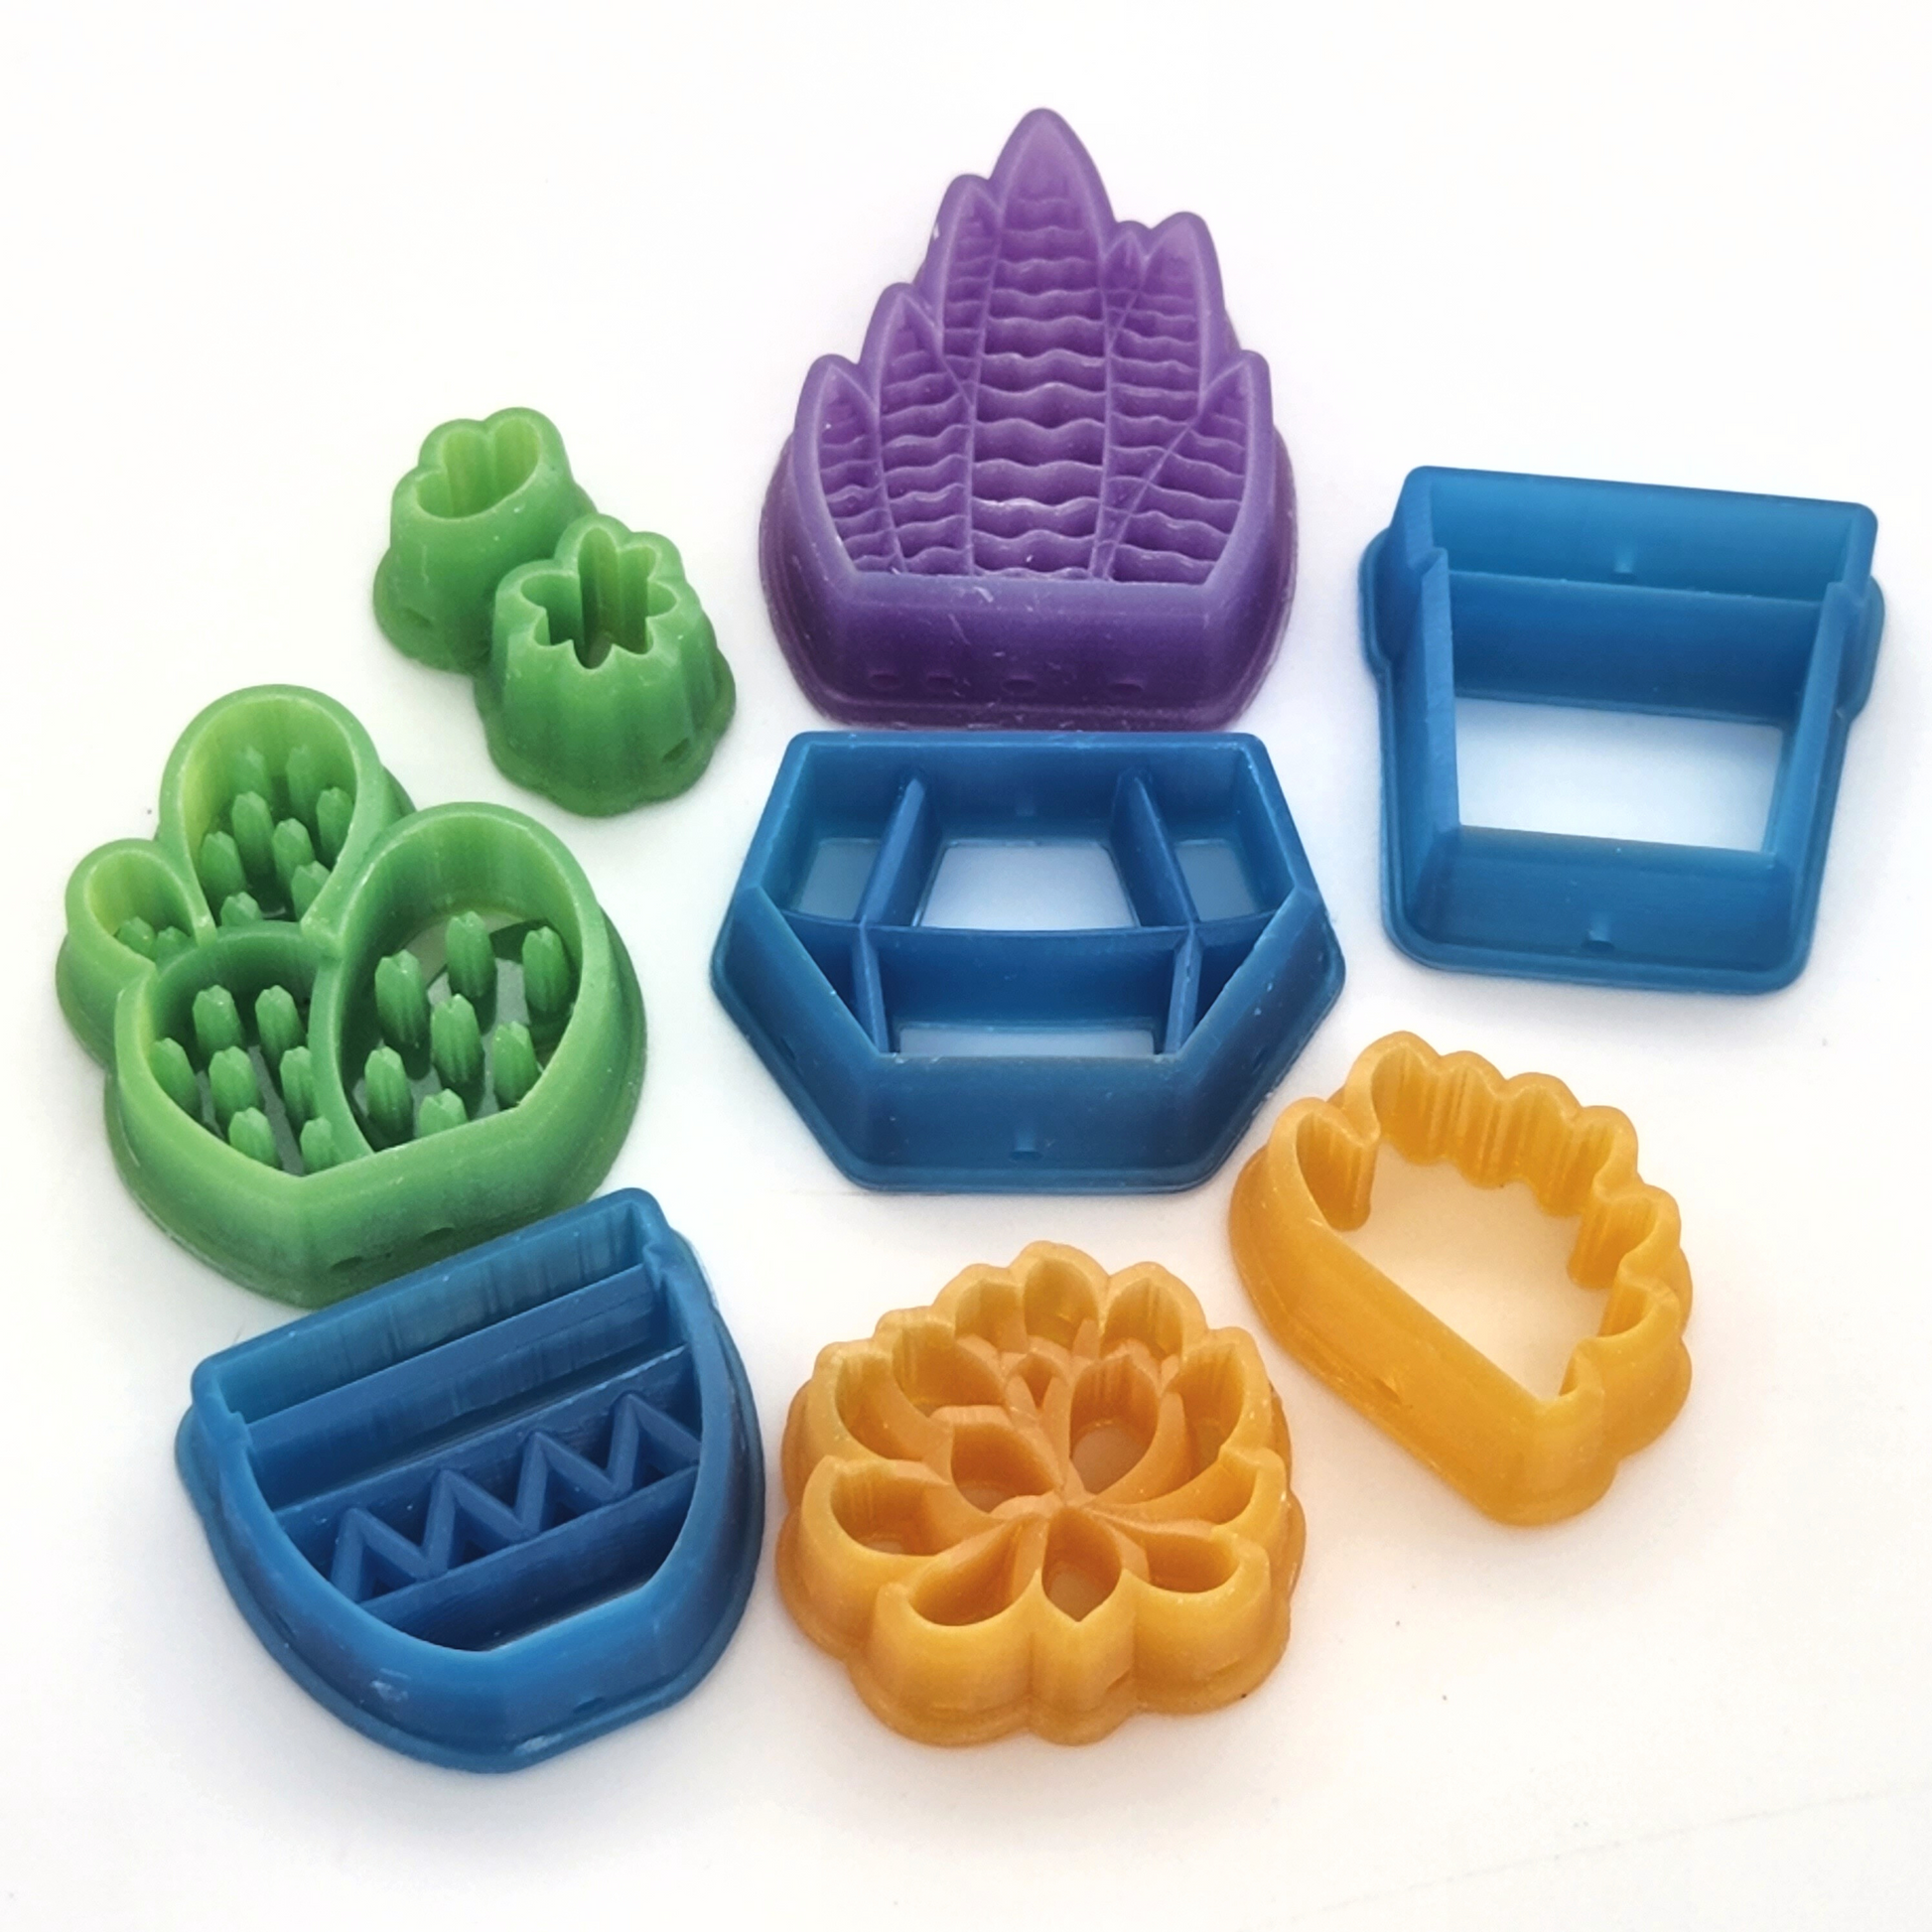 3D printed polymer clay Potted Plants Full Set Sharp Edge Cutters details, made out of Resin